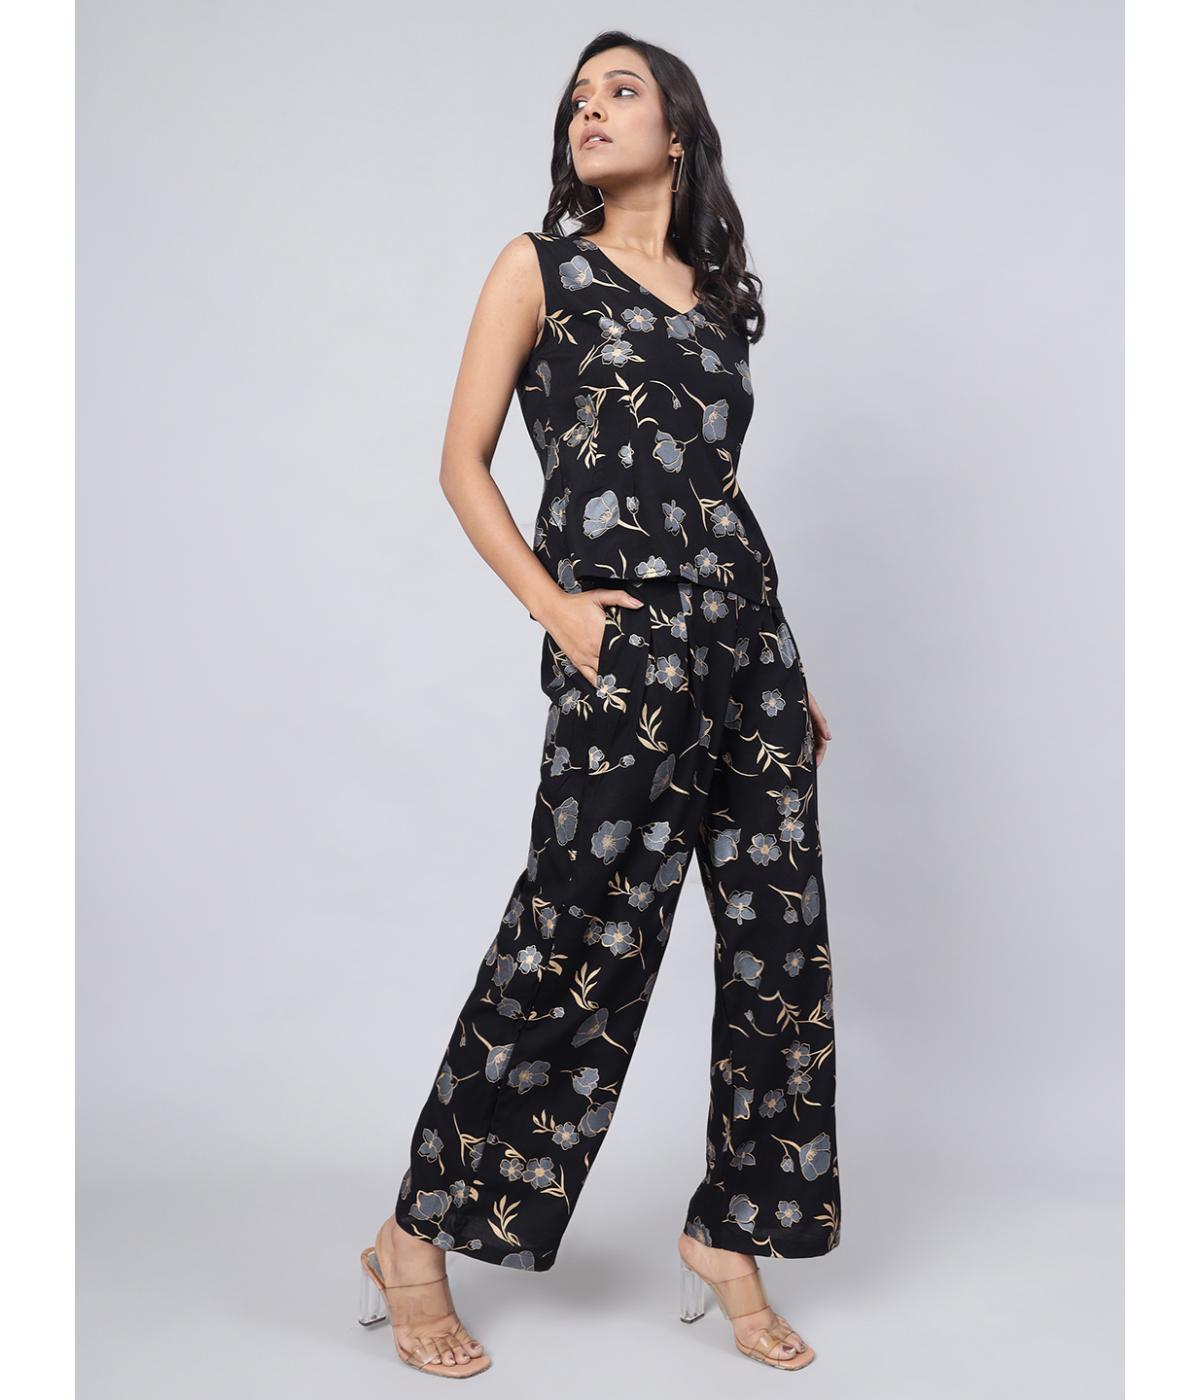 Daevish New Rayon Gold Floral Printed Sleevless Regular V Nack Top with Pant Co Ord Set for Women & Girl's